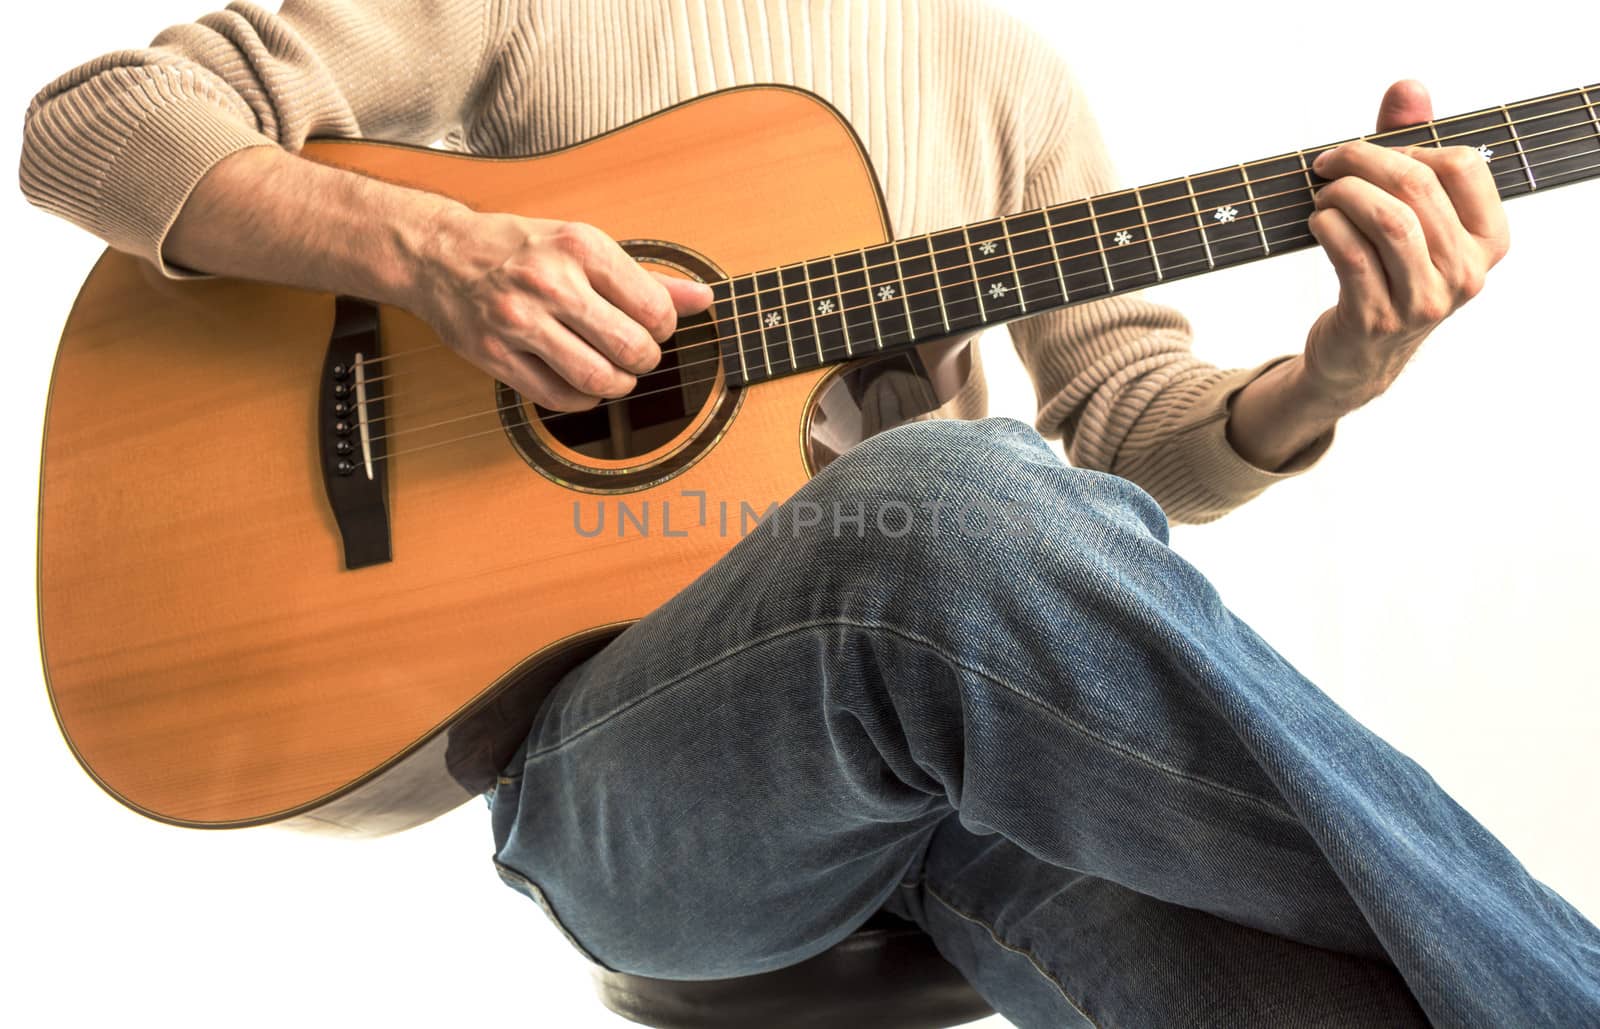 Guitarist playing his acoustic guitar ( Series with the same model available)